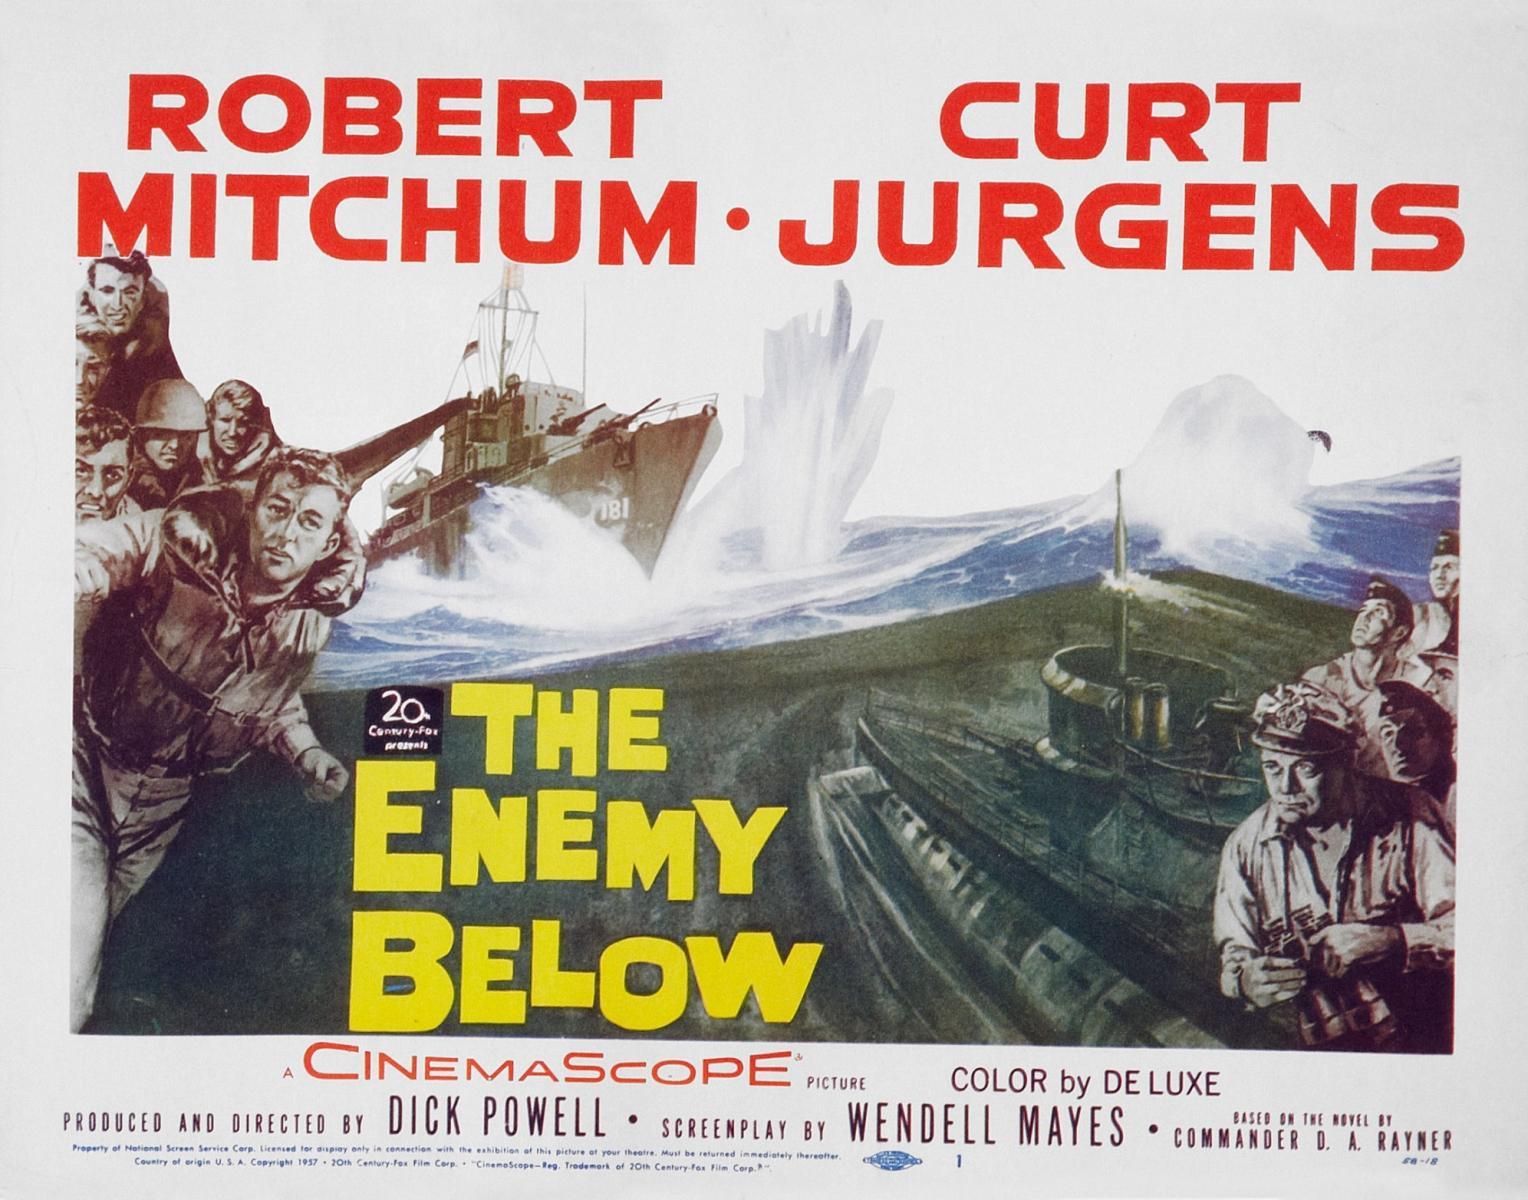 Image gallery for The Enemy Below - FilmAffinity